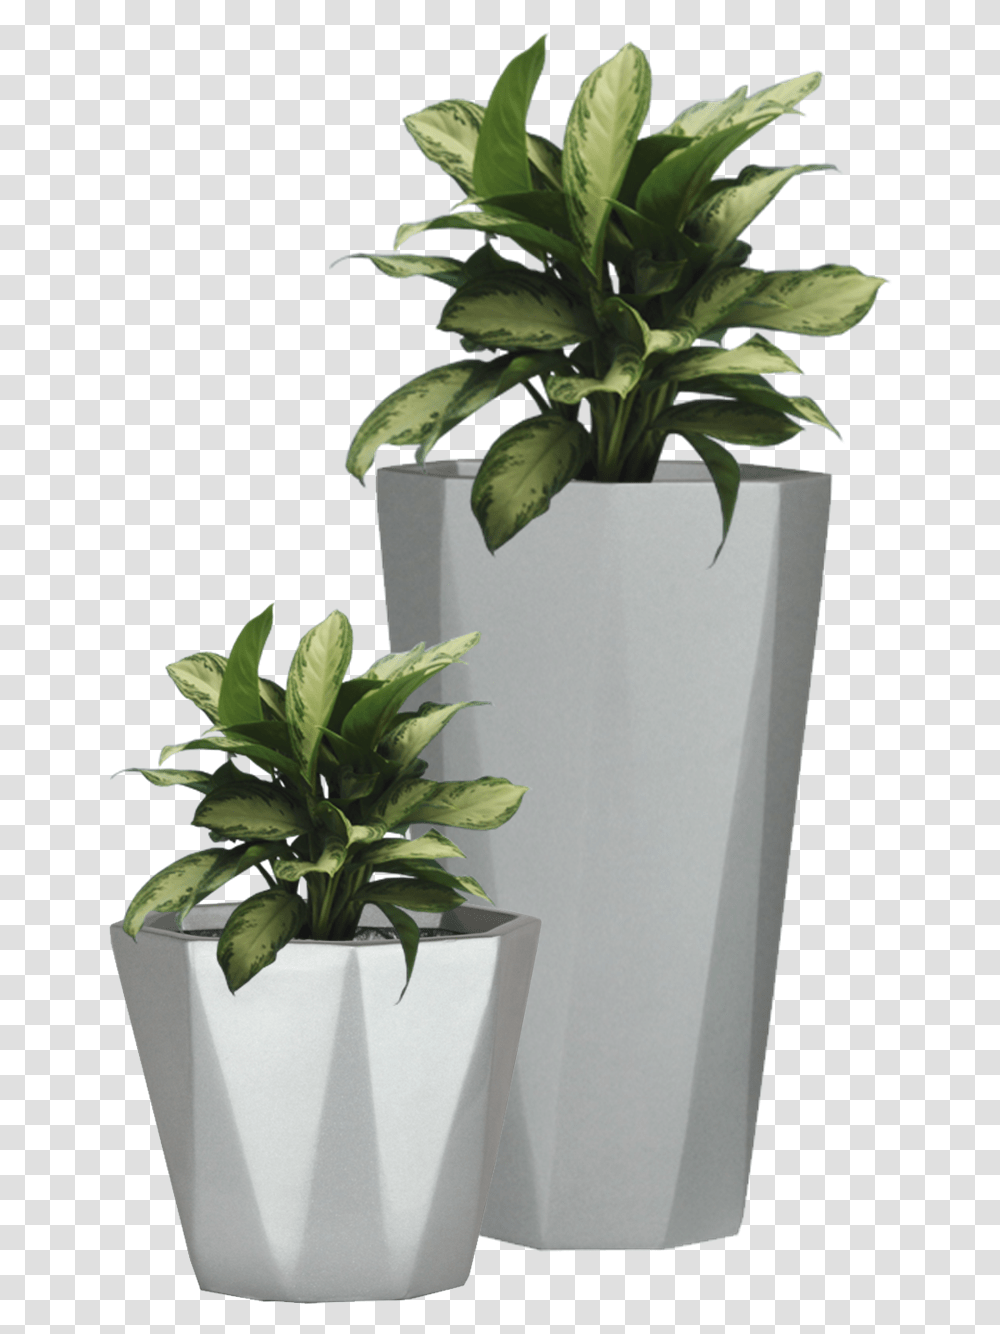 Flowerpot Etsy Wall Decal Succulent Plant With Pot, Potted Plant, Vase, Jar, Pottery Transparent Png